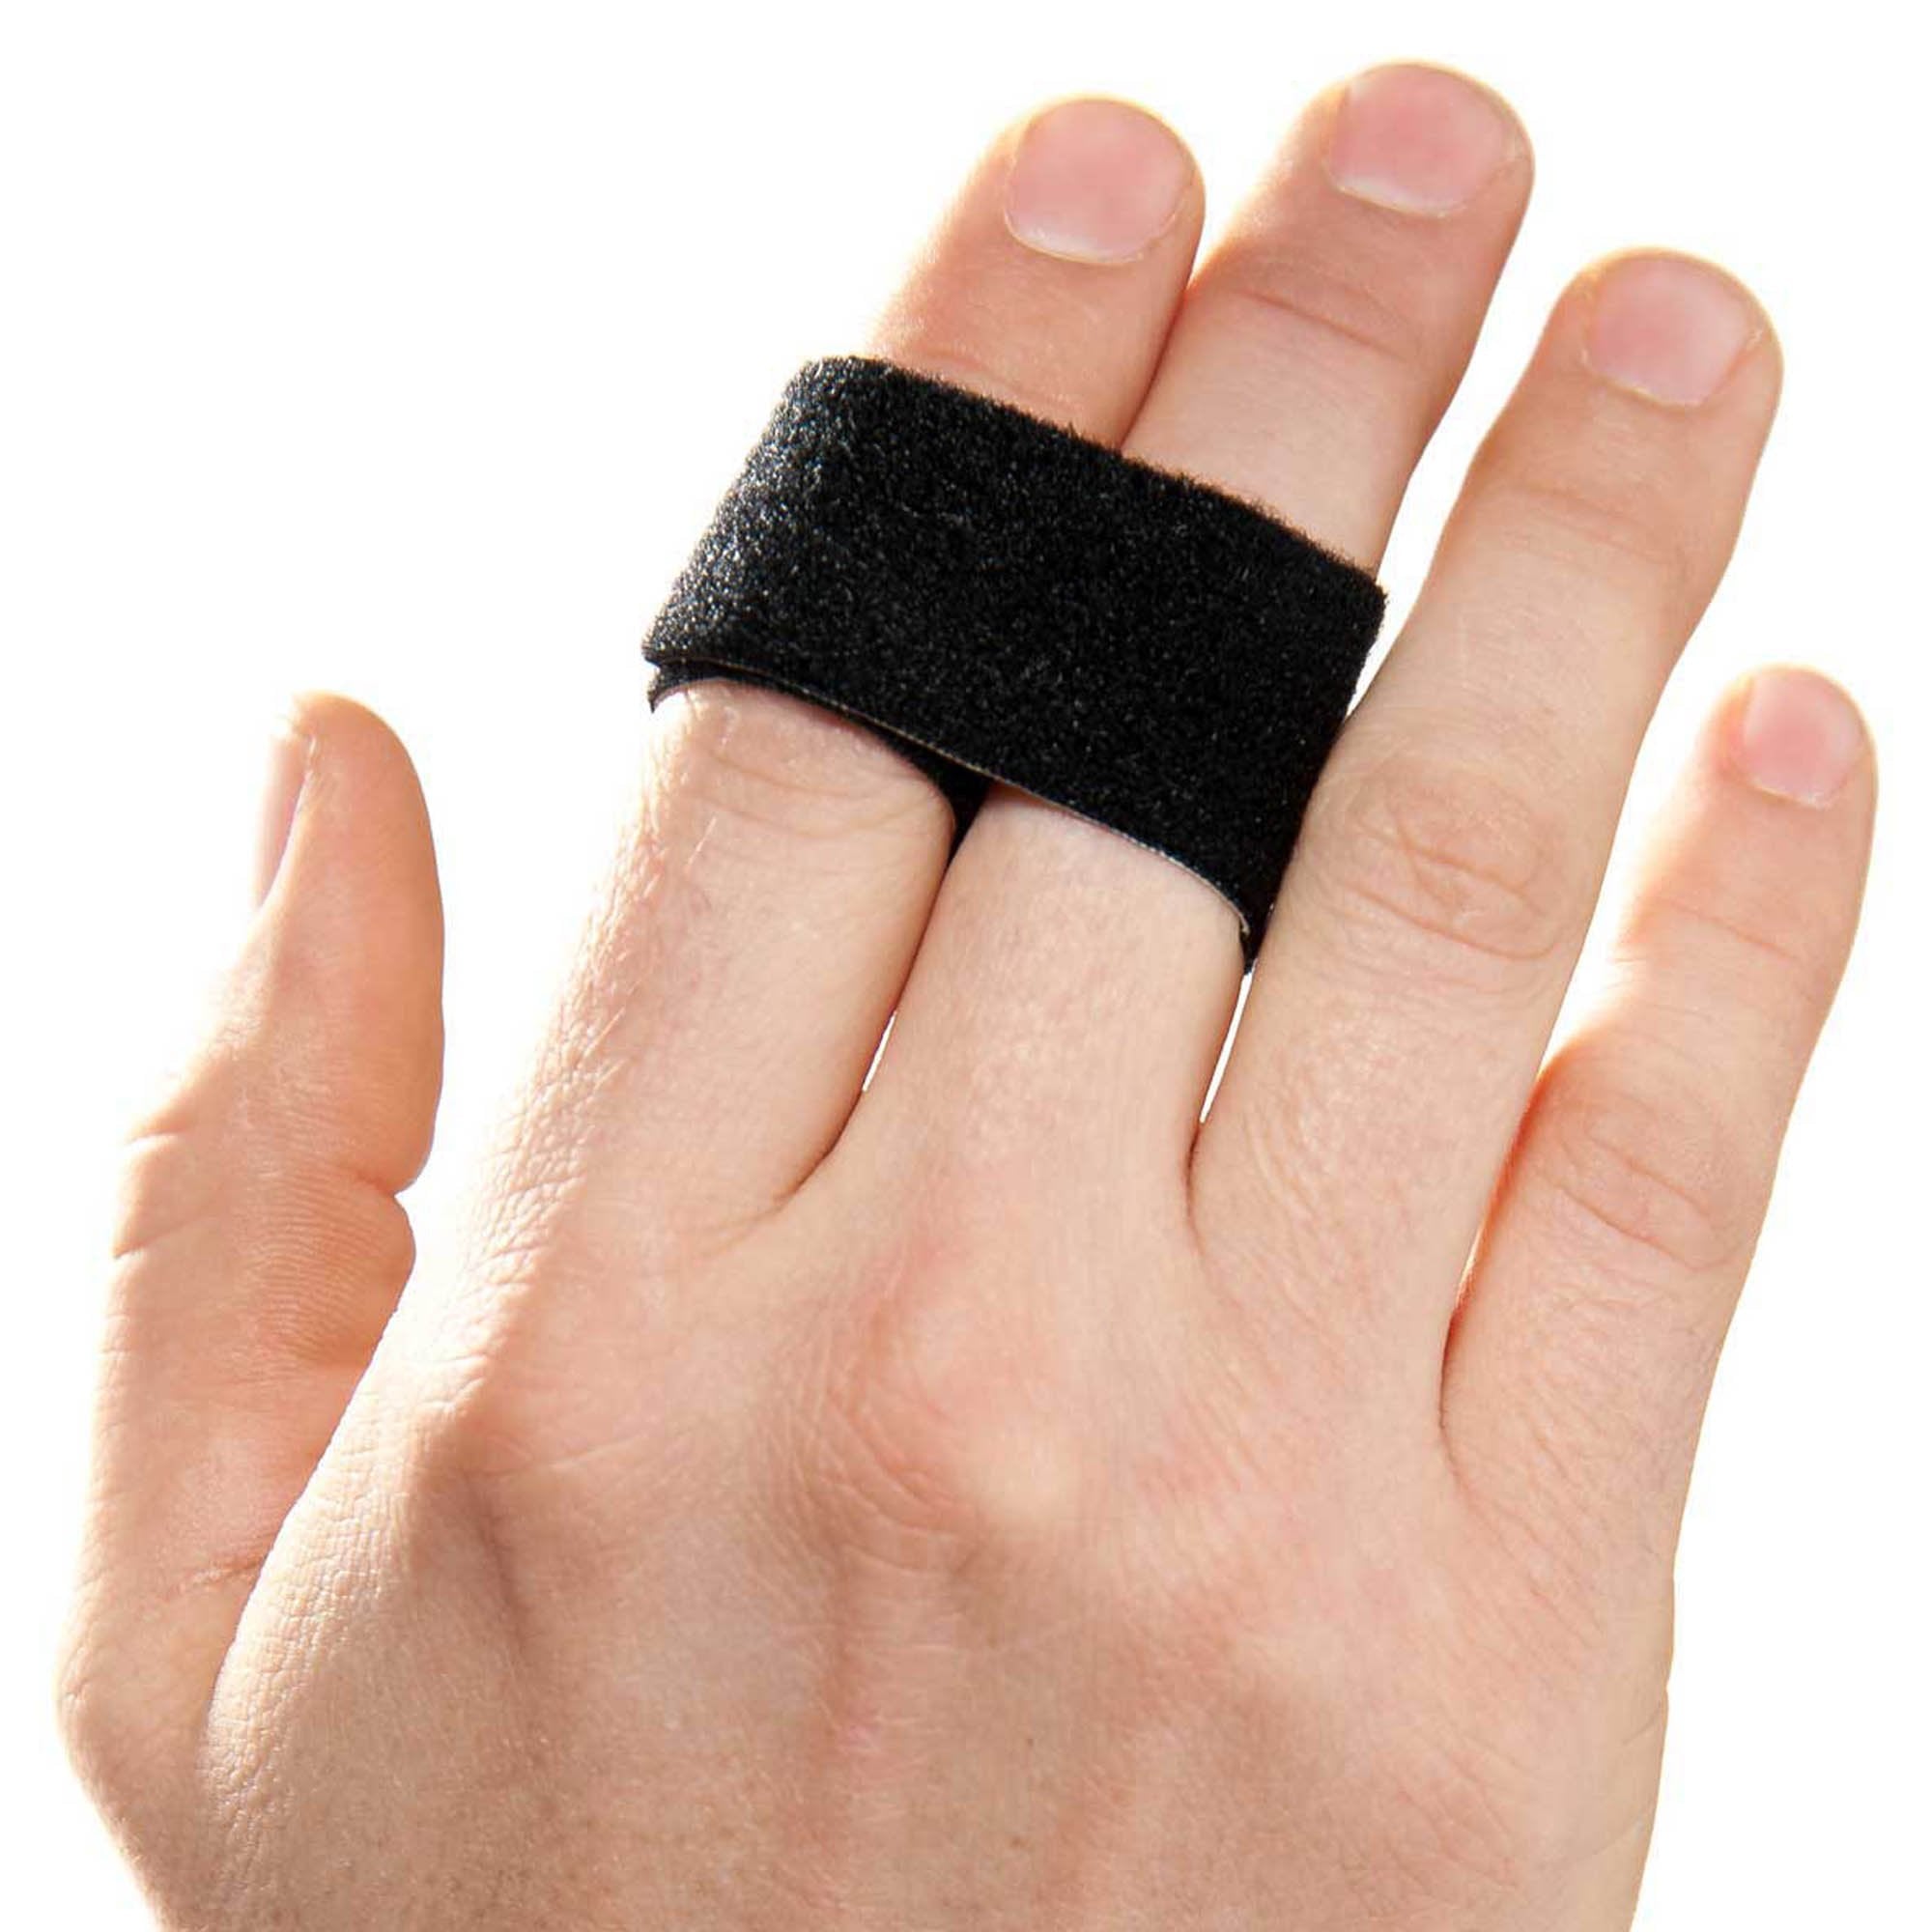 Finger Wrap Splint 3pp® Buddy Loops® Adult One Size Fits Most Hook and Loop Strap Closure Left or Right Hand Black (5 Units)